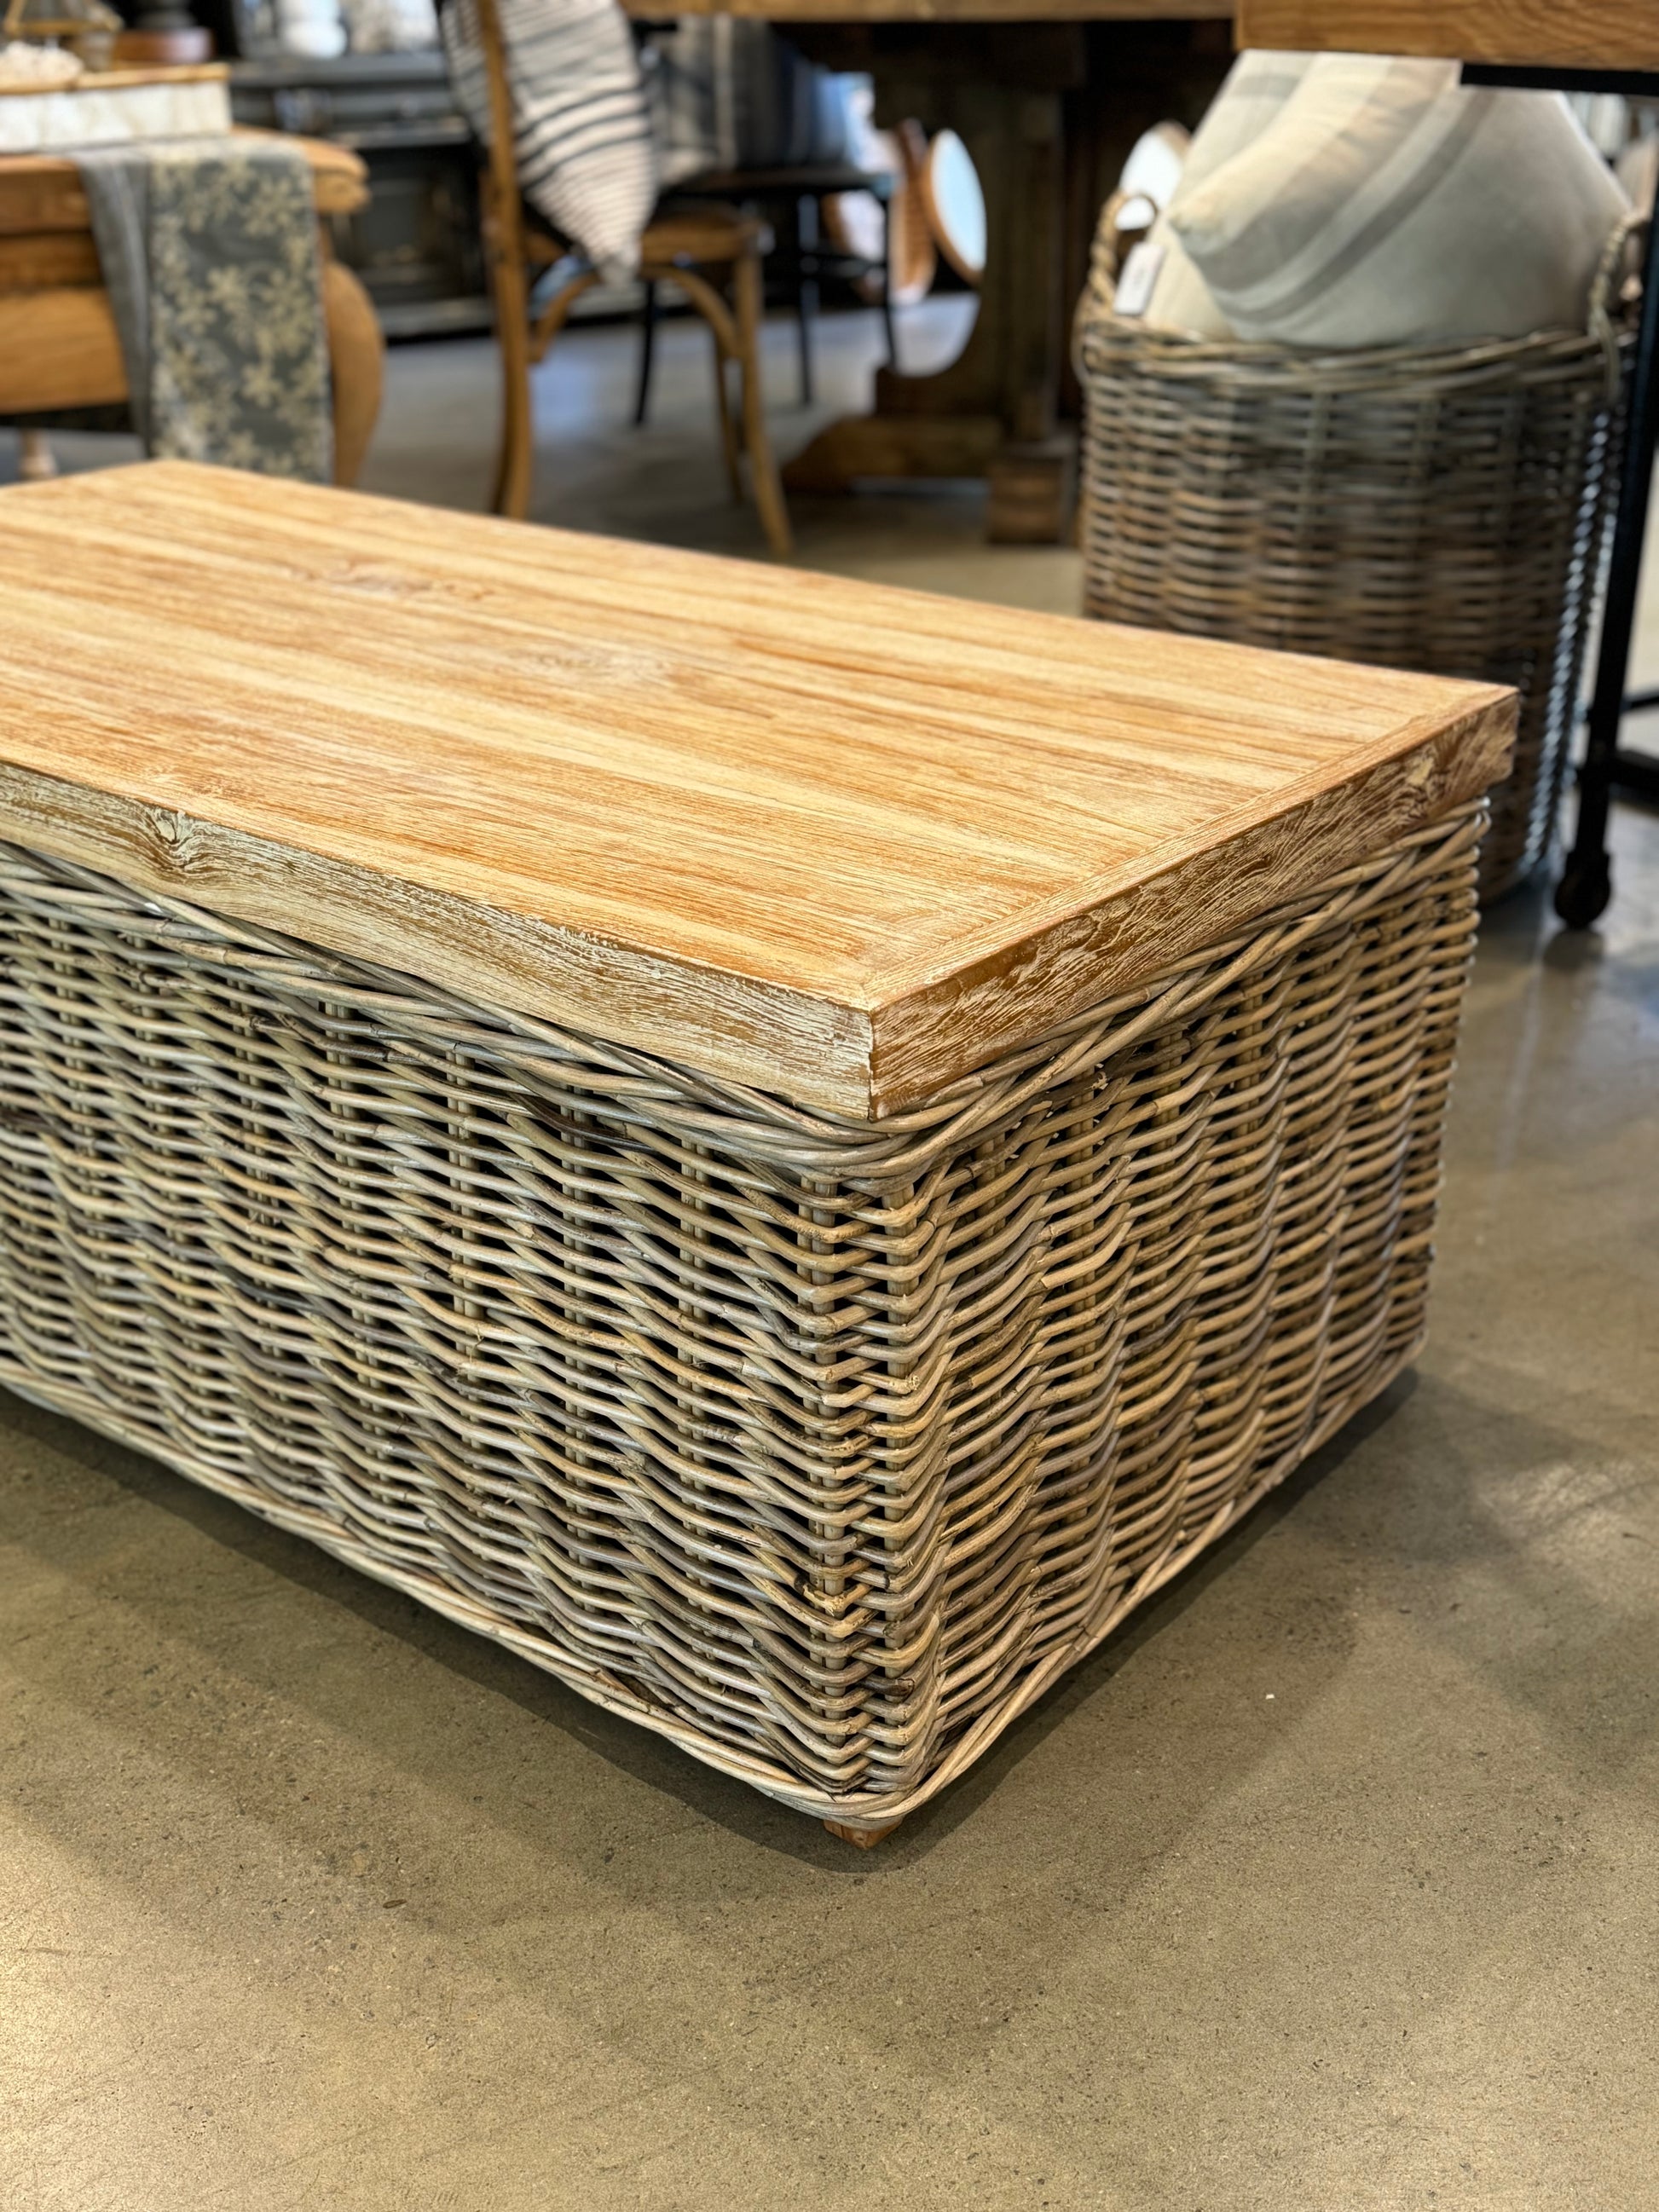 The Setiawan Coffee Table is a stunning addition to any room. The combination of rattan and rustic teak creates a unique and lively texture, enhanced by a delicate whitewash finish. This table brings a dynamic feel and personal touch to your living space. Corner